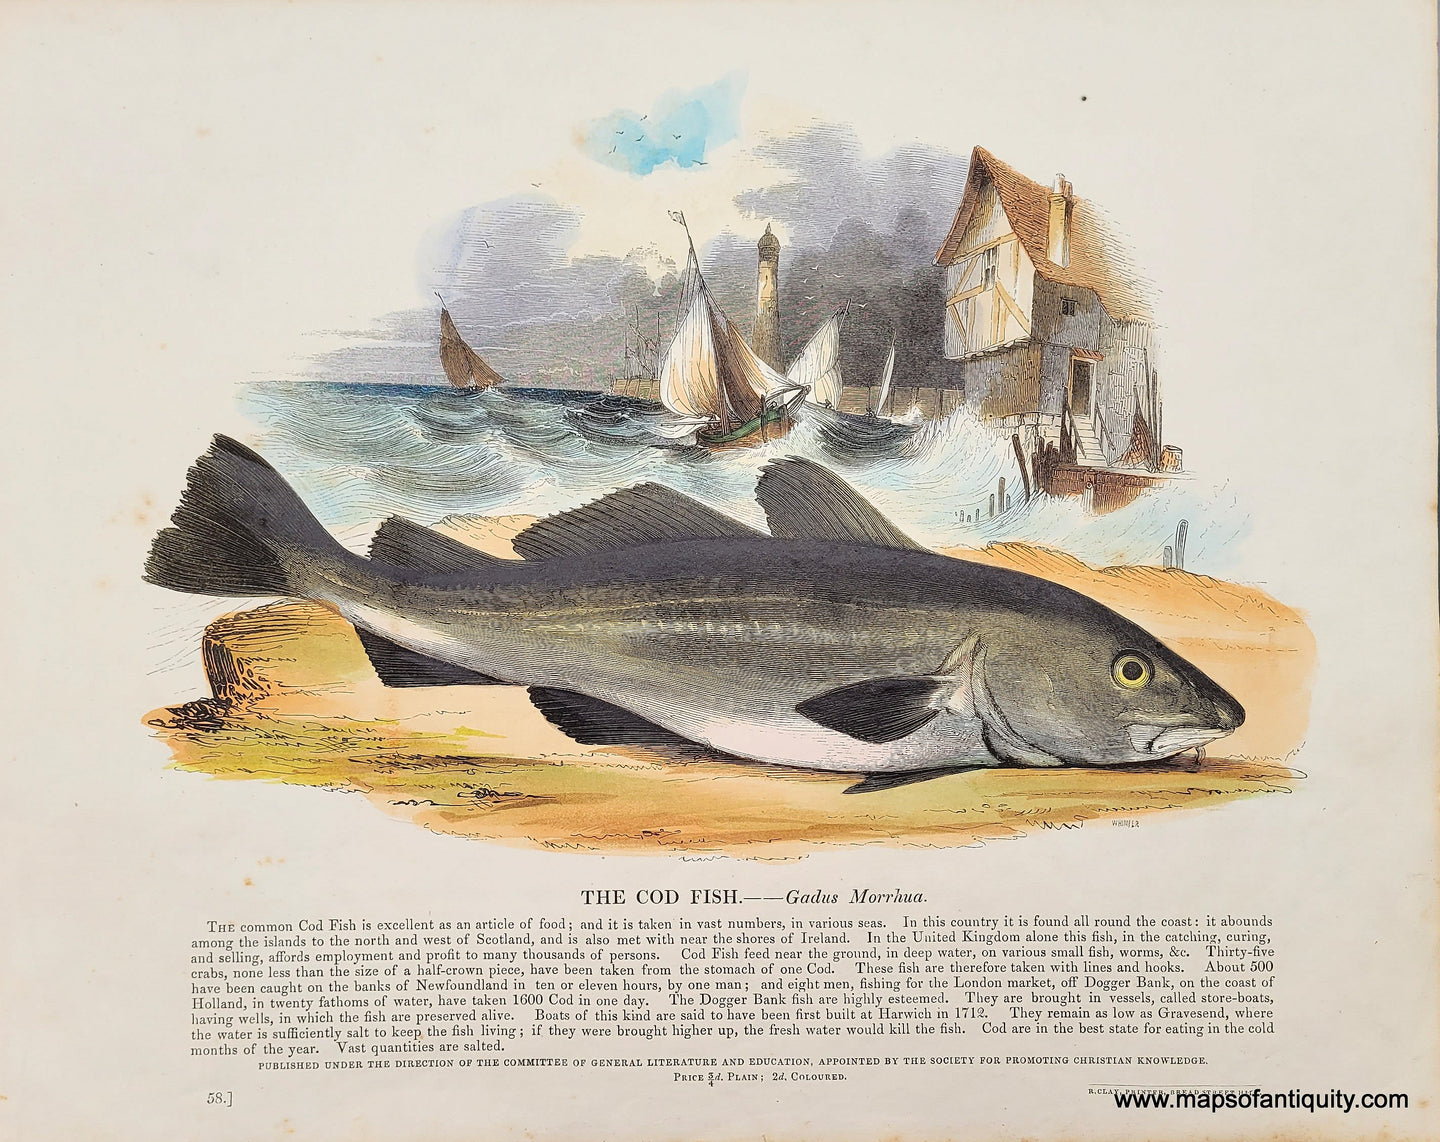 Genuine-Antique-Print-The-Cod-Fish-1845-Whimper-Maps-Of-Antiquity